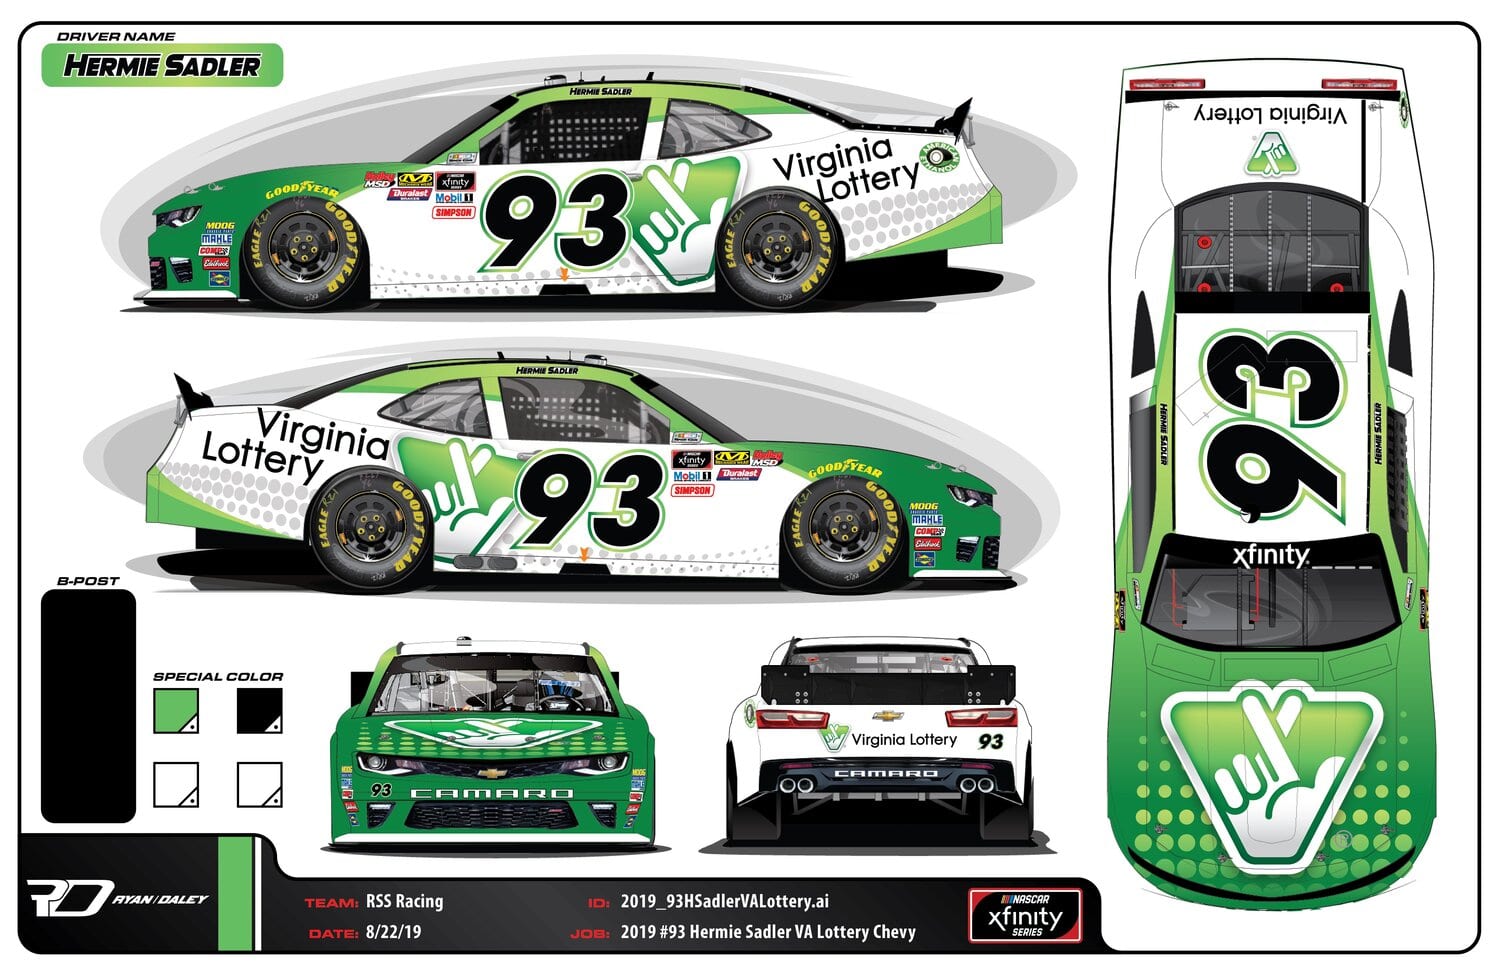 Hermie Sadler's RSS Racing entry for this weekend at Richmond Raceway.